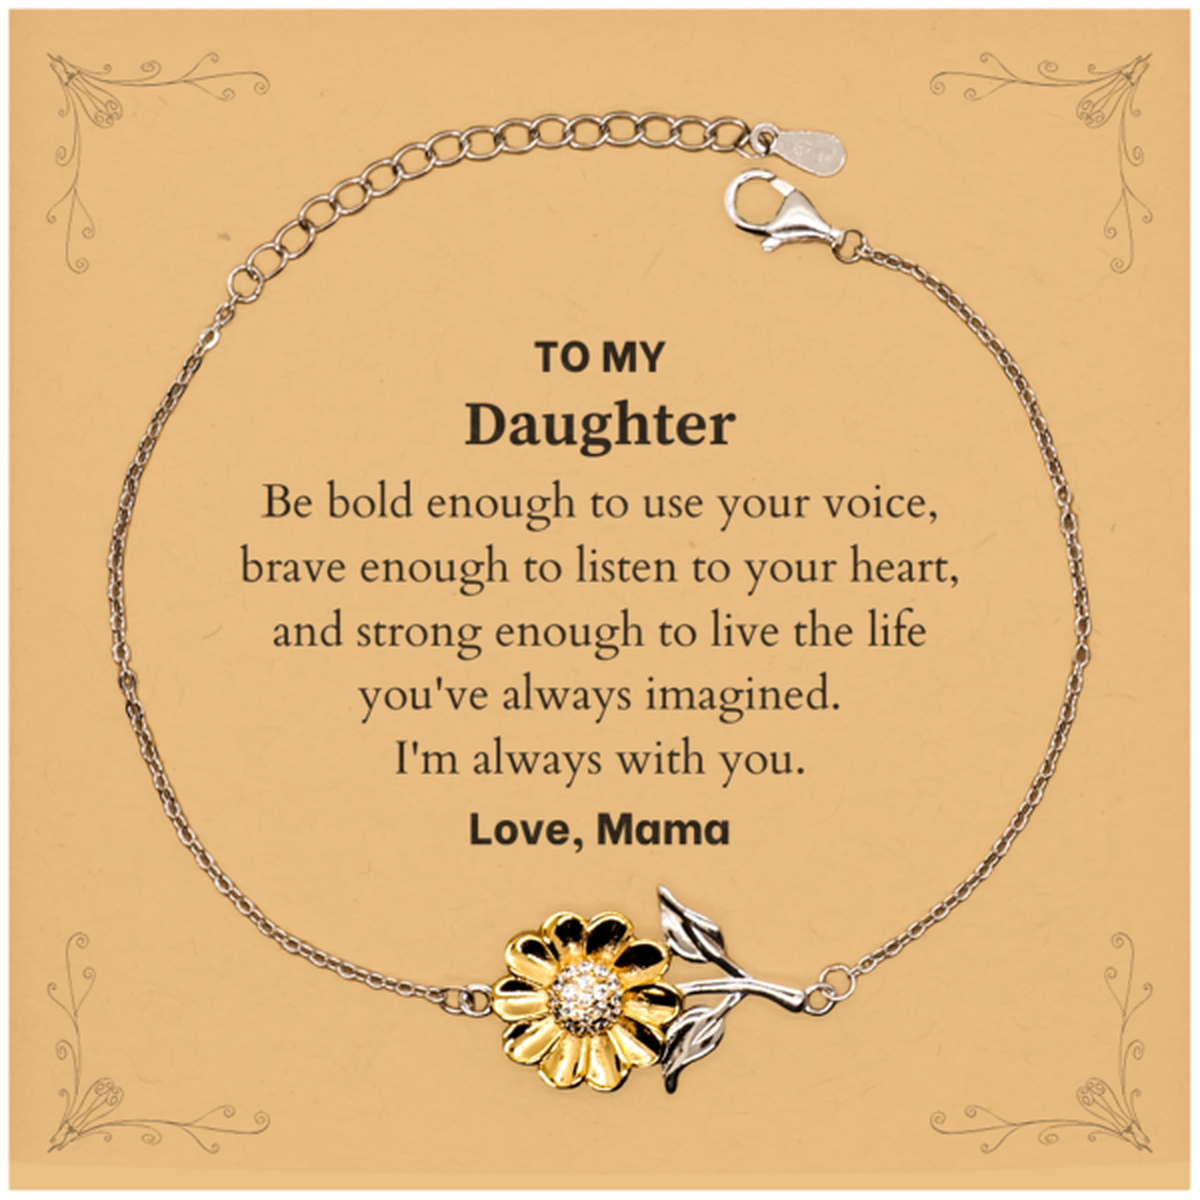 Keepsake Daughter Sunflower Bracelet Gift Idea Graduation Christmas Birthday Daughter from Mama, Daughter Be bold enough to use your voice, brave enough to listen to your heart. Love, Mama